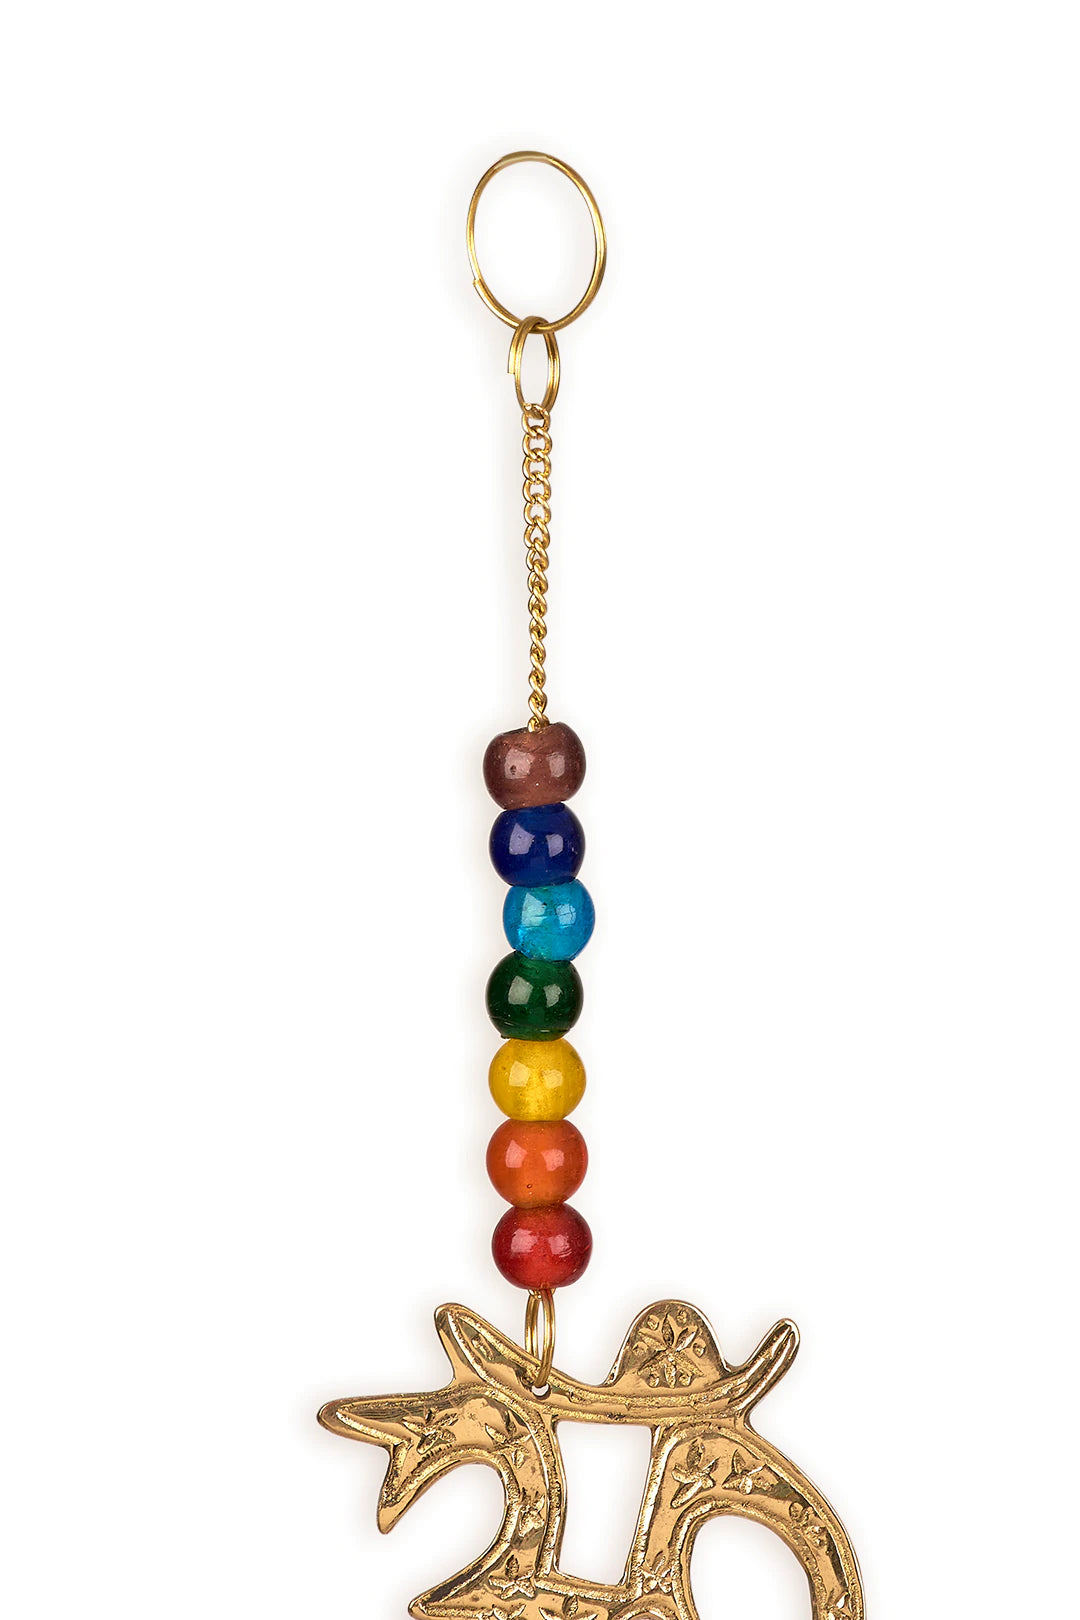 Om Brass Chakra Hanging Bell Wind Chime Wicca Symbol Metaphysical 7 Chakras